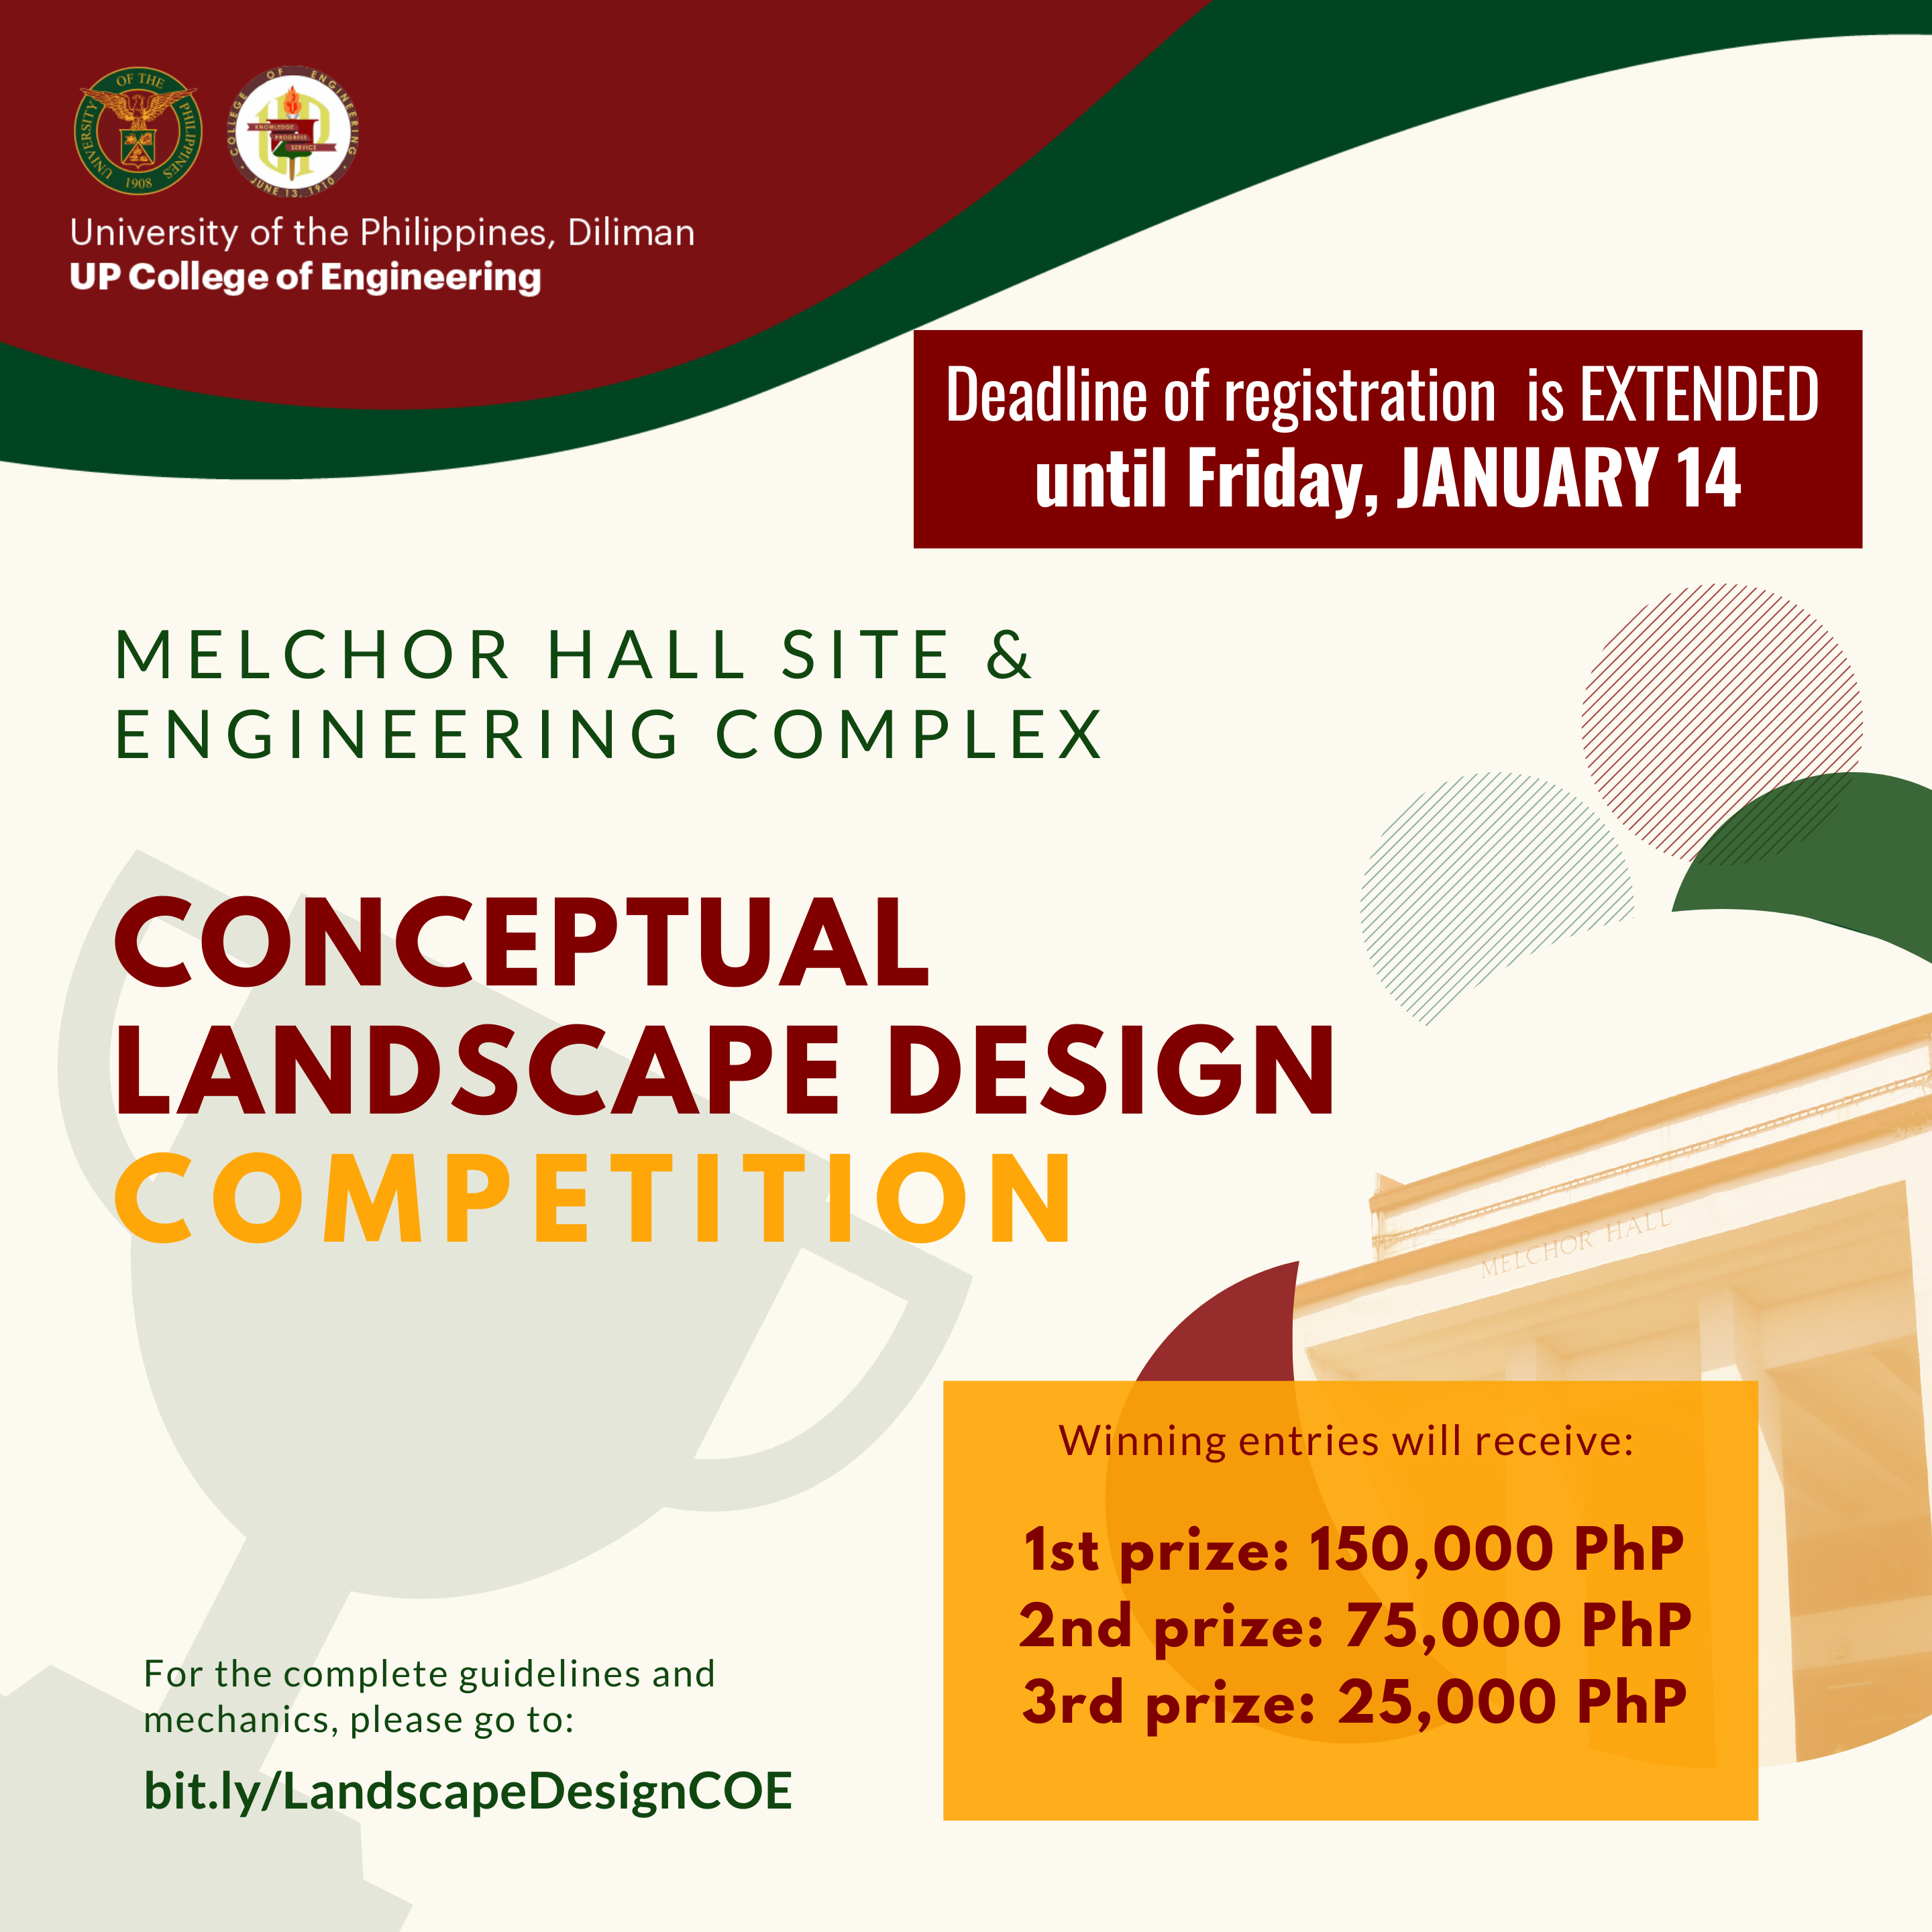 Melchor Hall Site and Engineering Complex Conceptual Landscape Design Competition (Registration Until January 14)